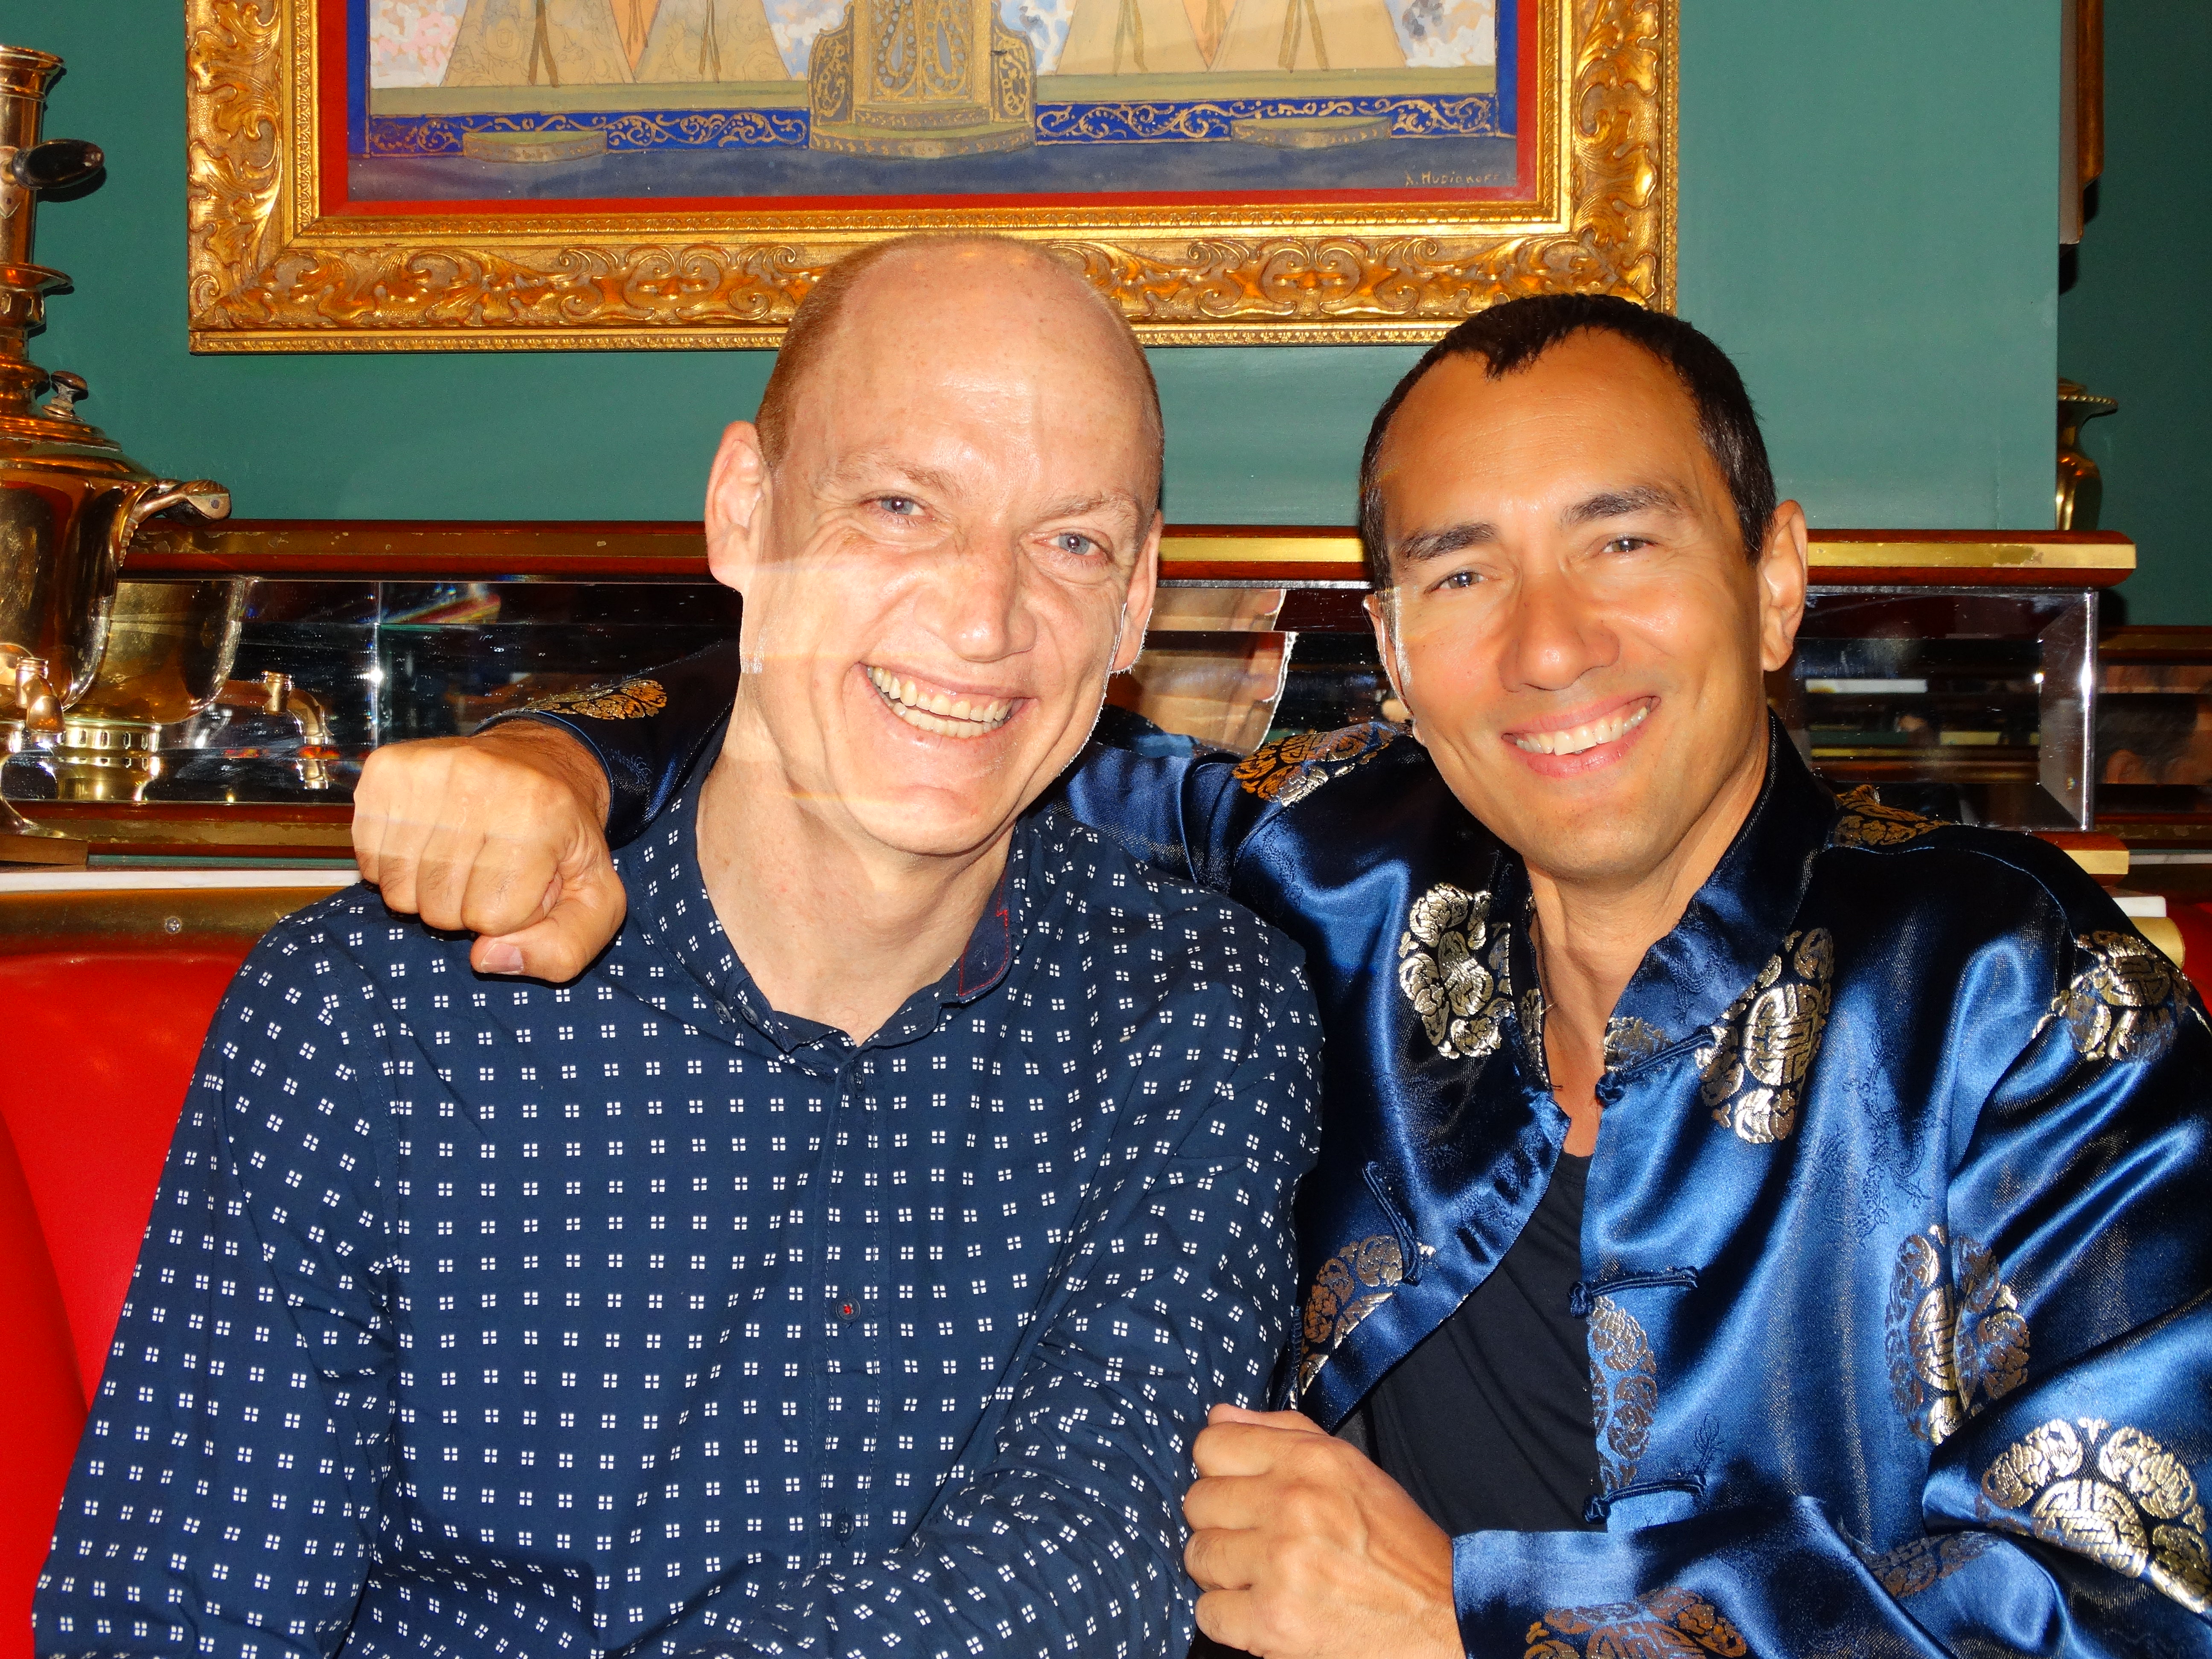 Here with dear friend and Carnegie Hall collaborator 2015 Grammy Award Winner Wouter Kellerman